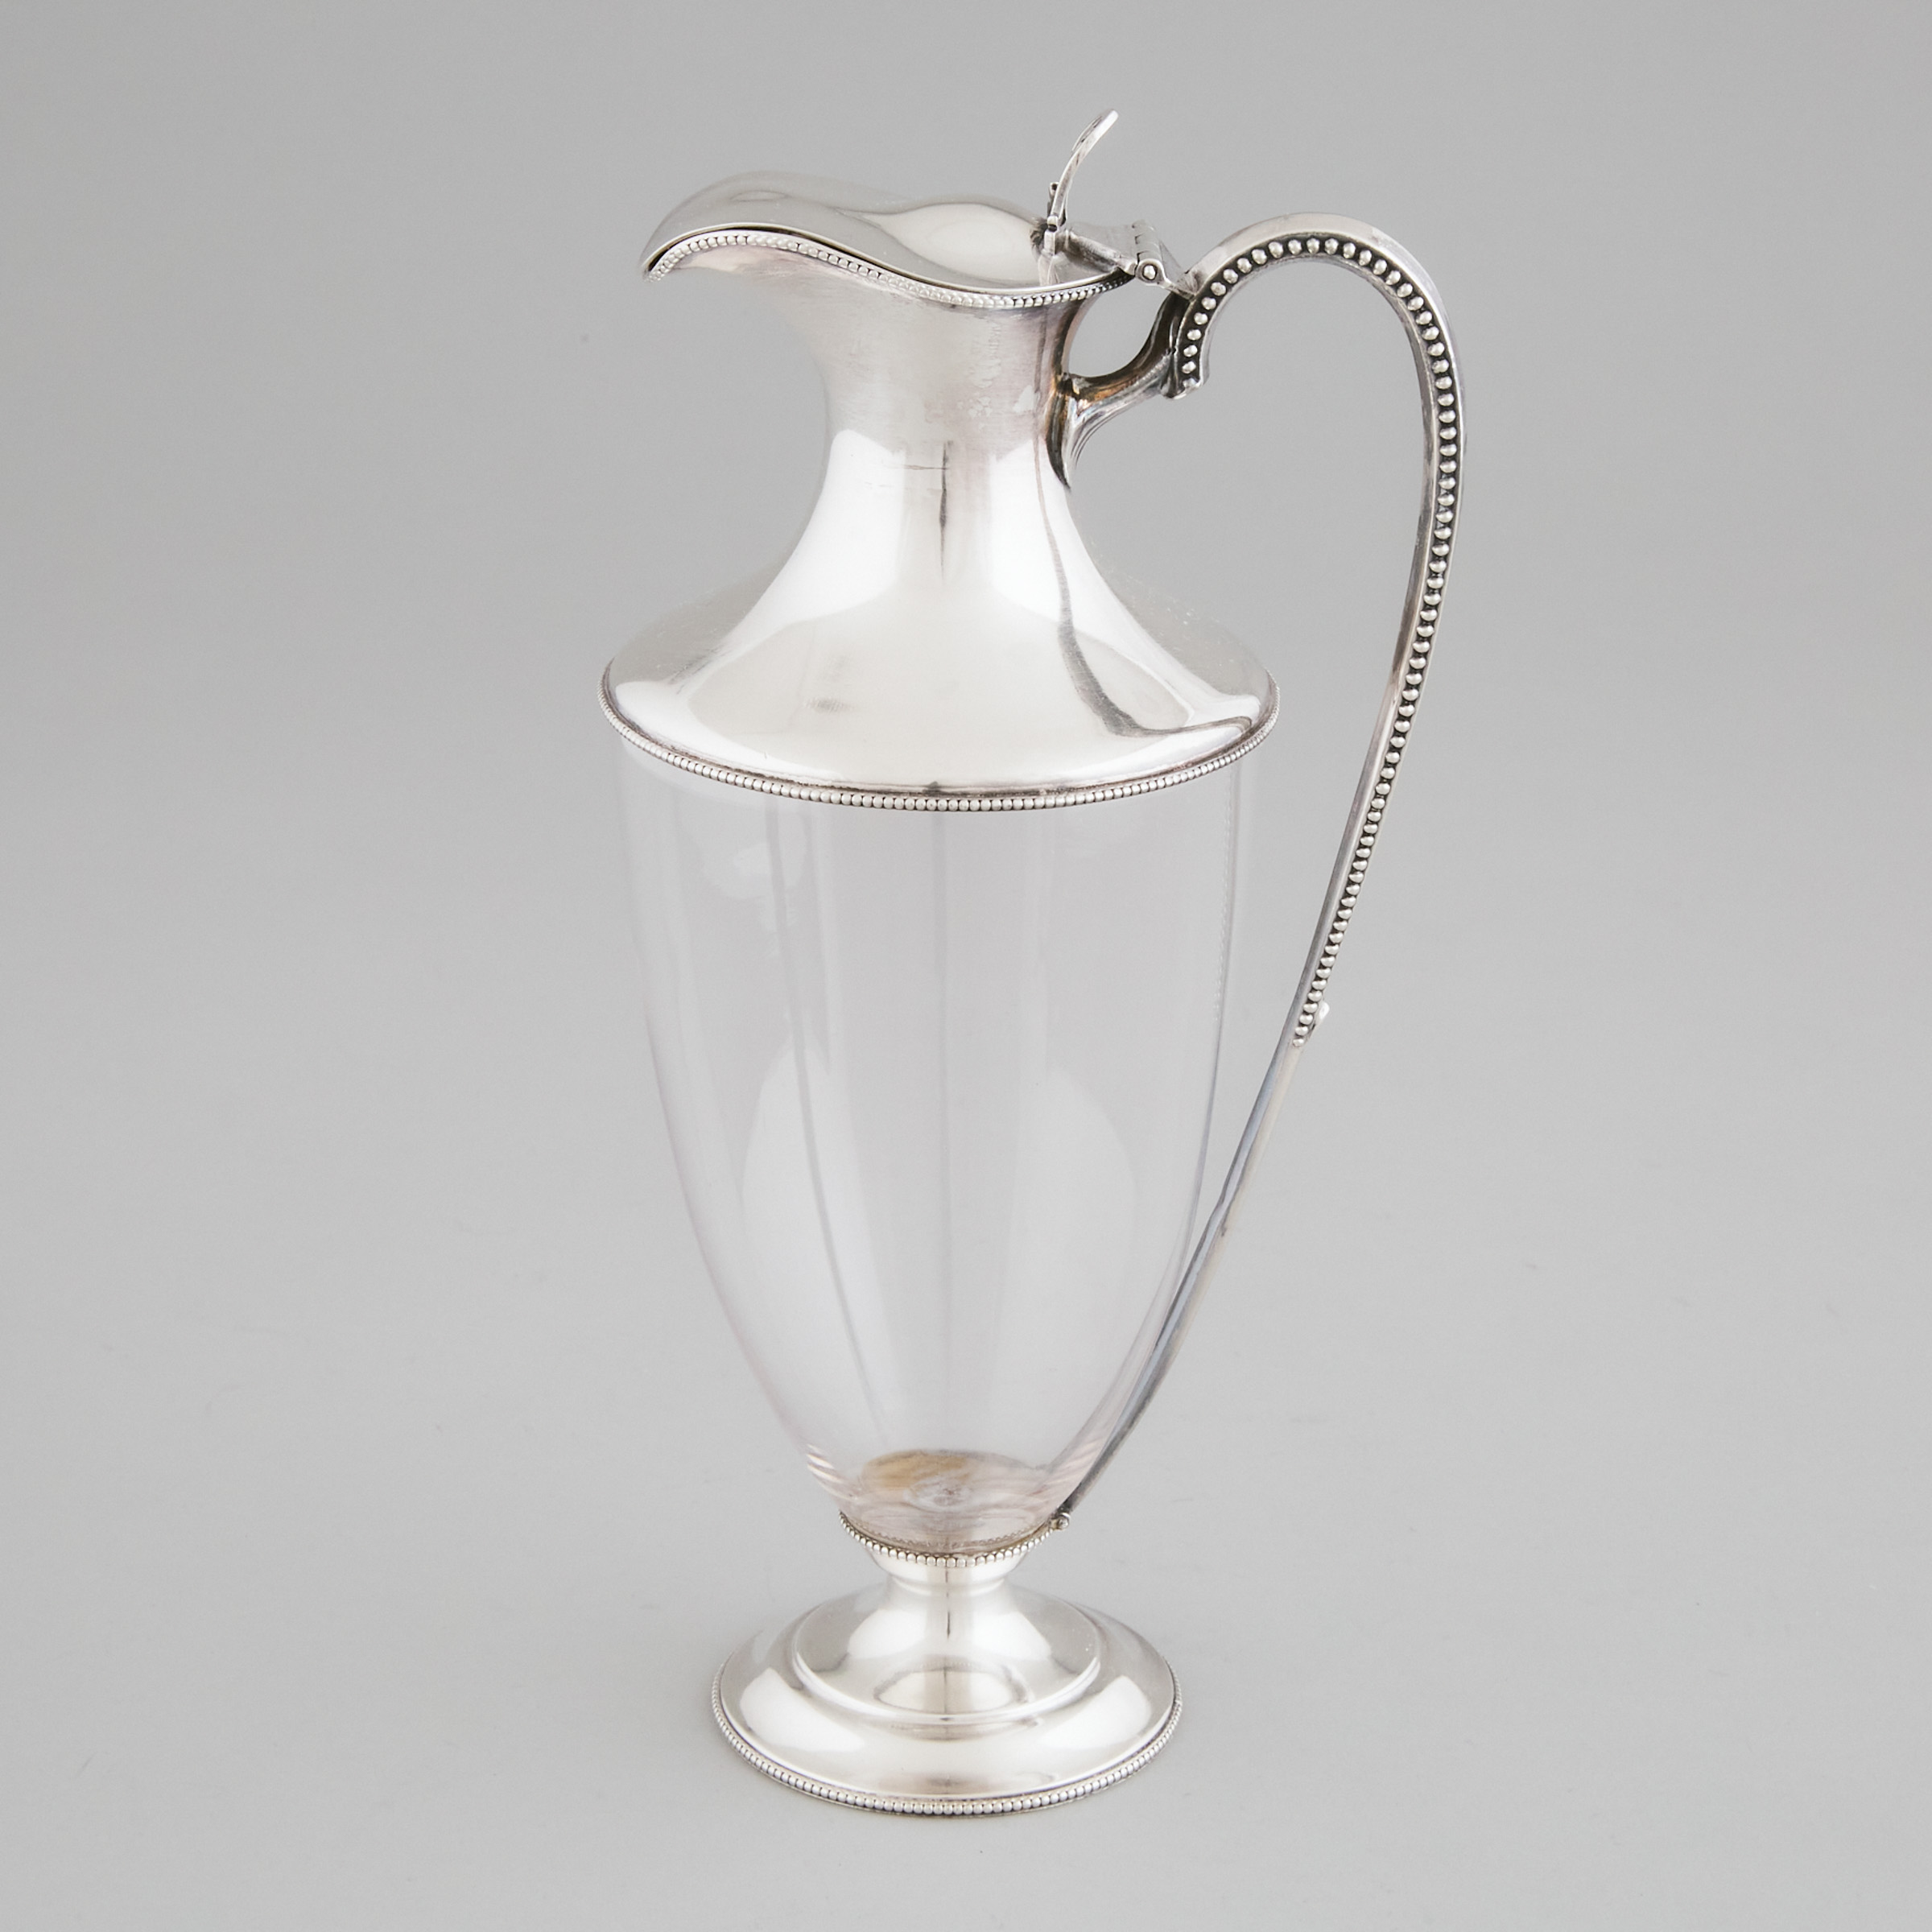 Victorian Silver Mounted Glass Claret Jug, William & George Sissons, Sheffield, 1884